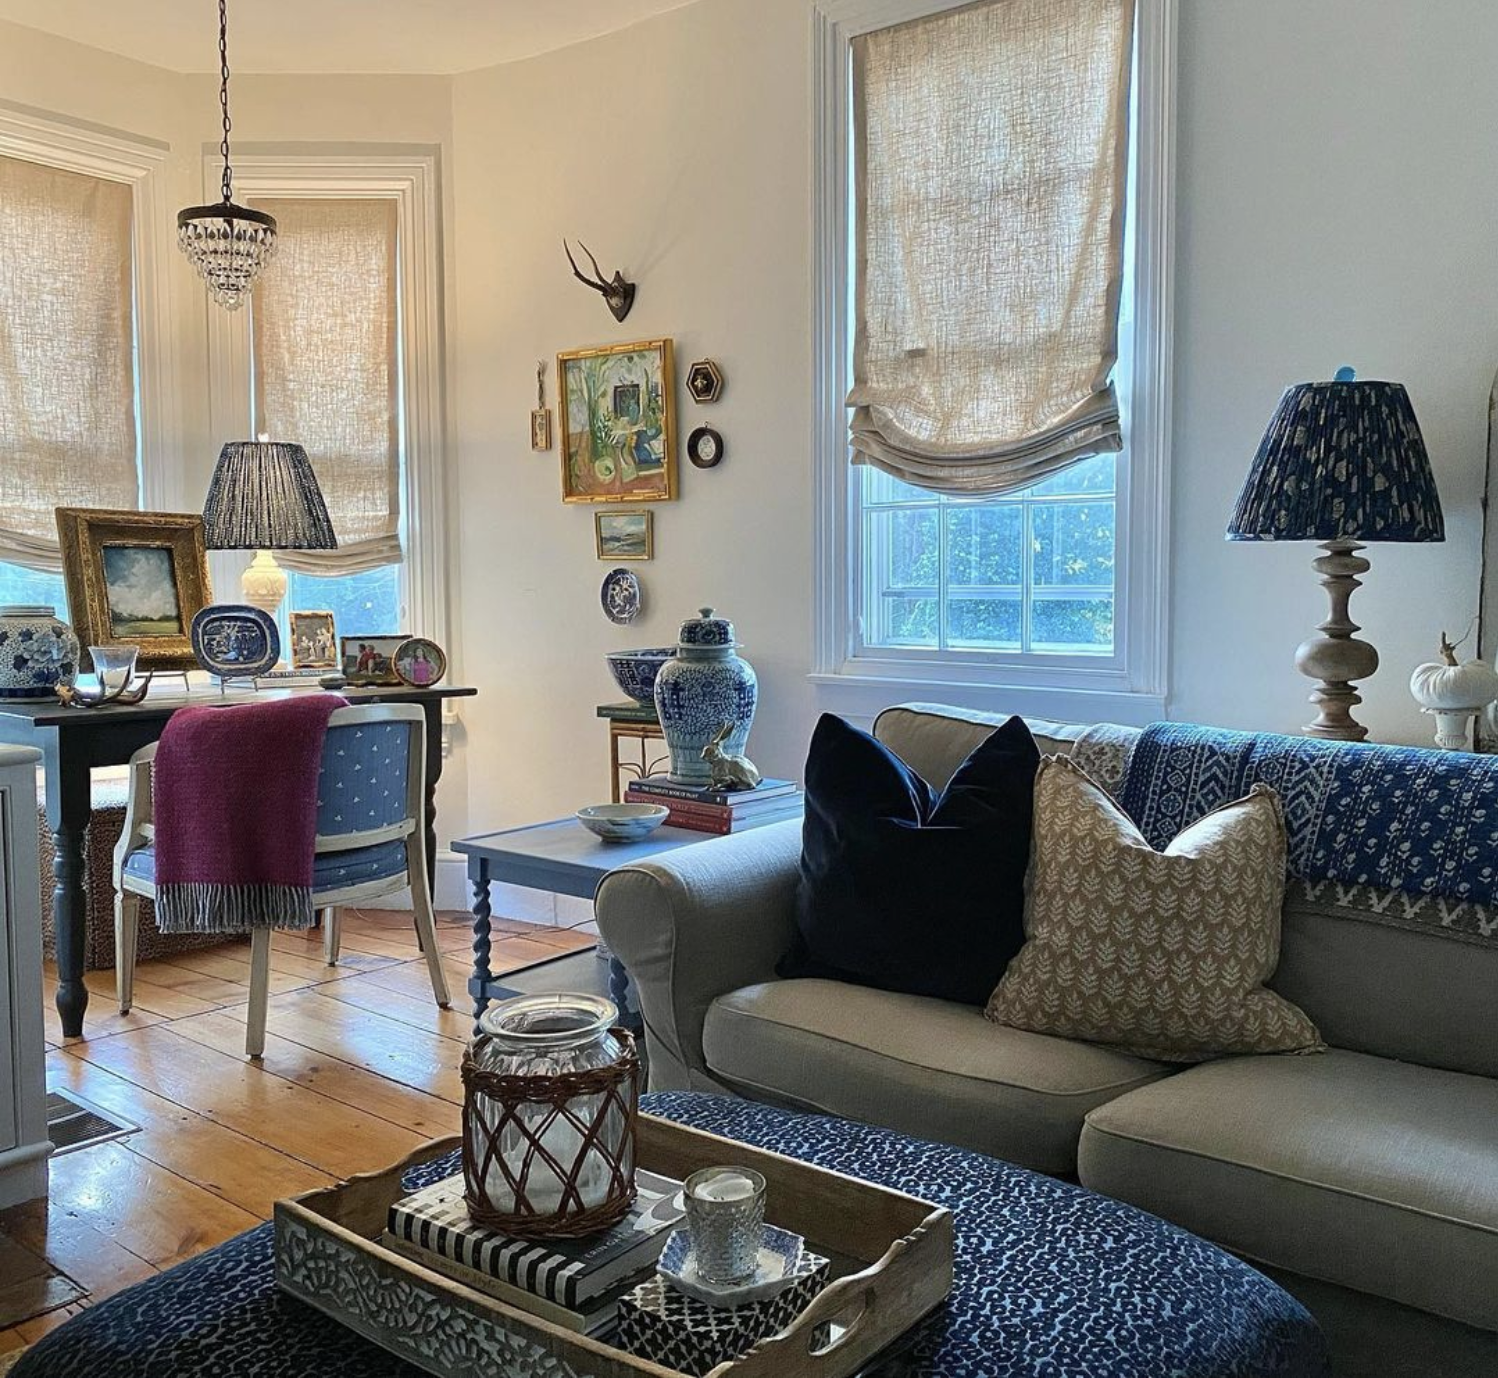 Eclectic Home Tour - love the antiques in this historic home kellyelko.com